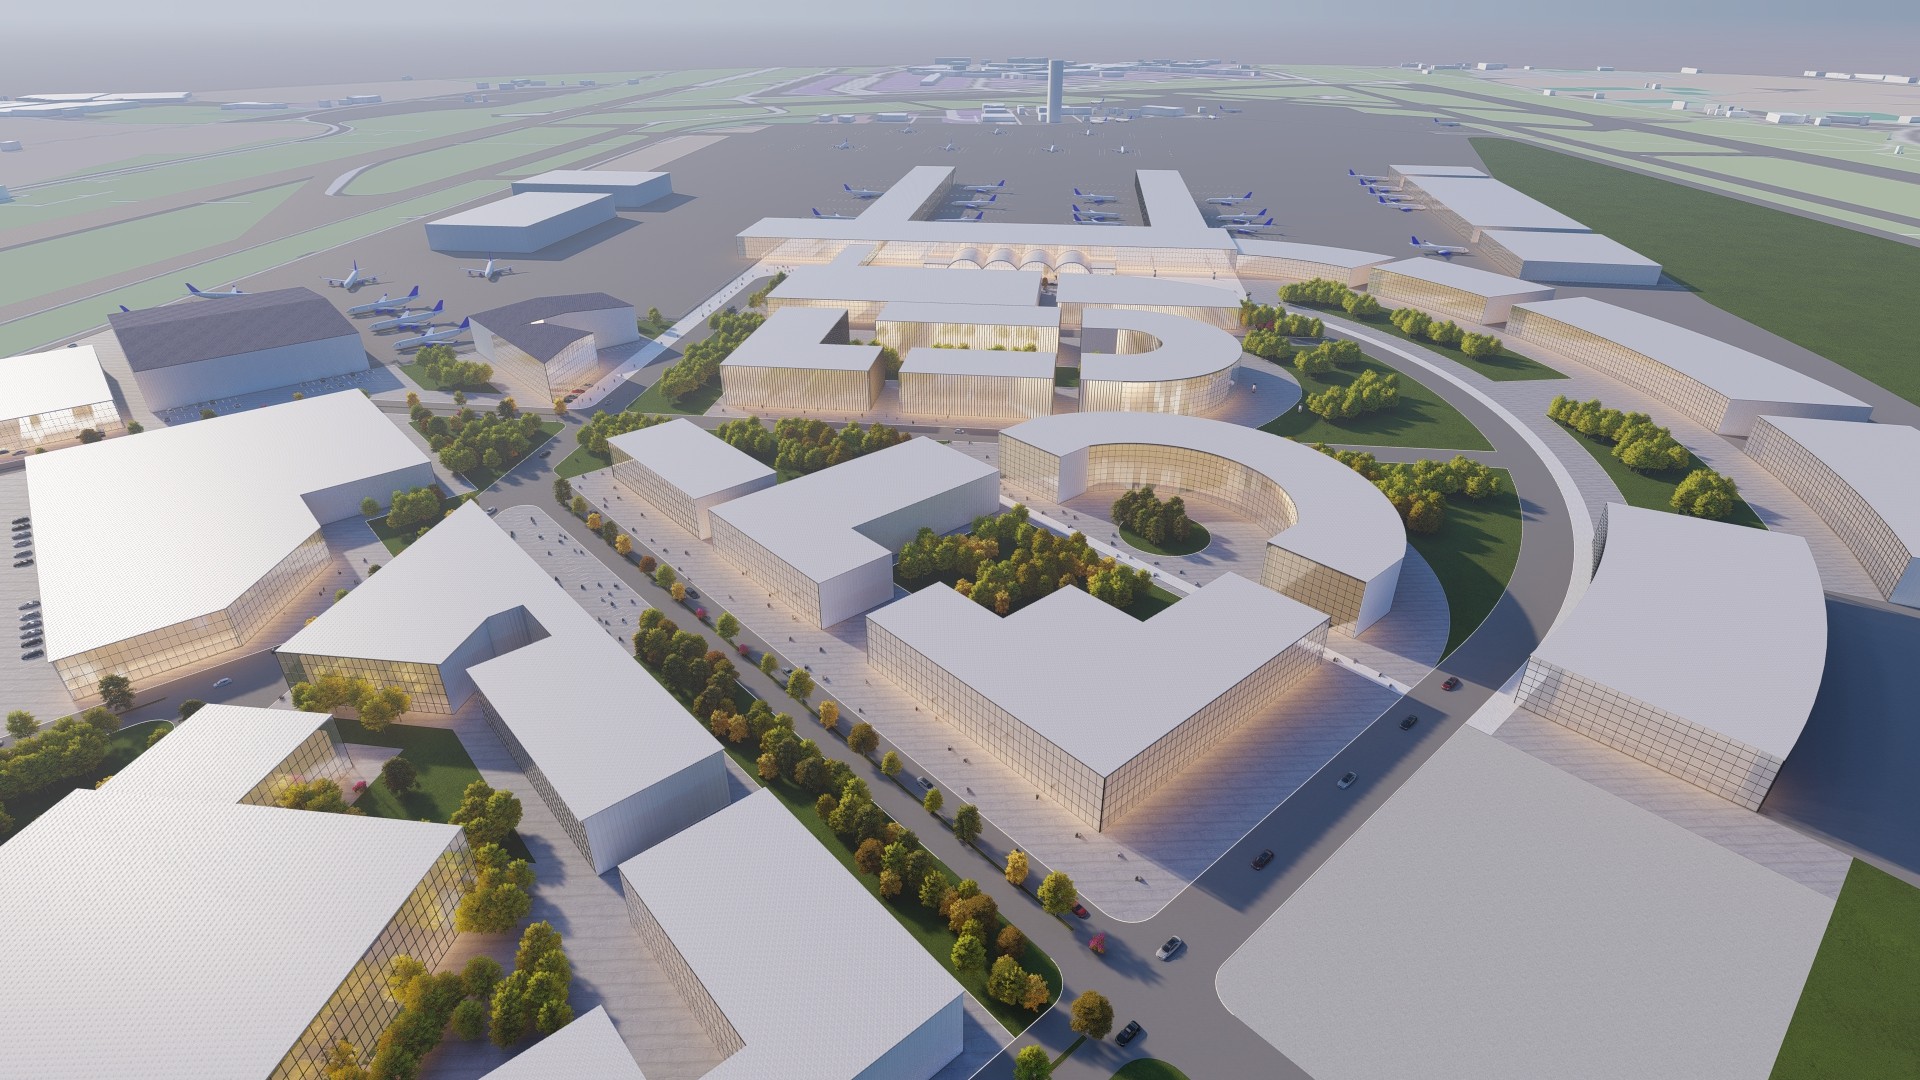 Concept plans for a new Western Campus at Dublin Airport. 